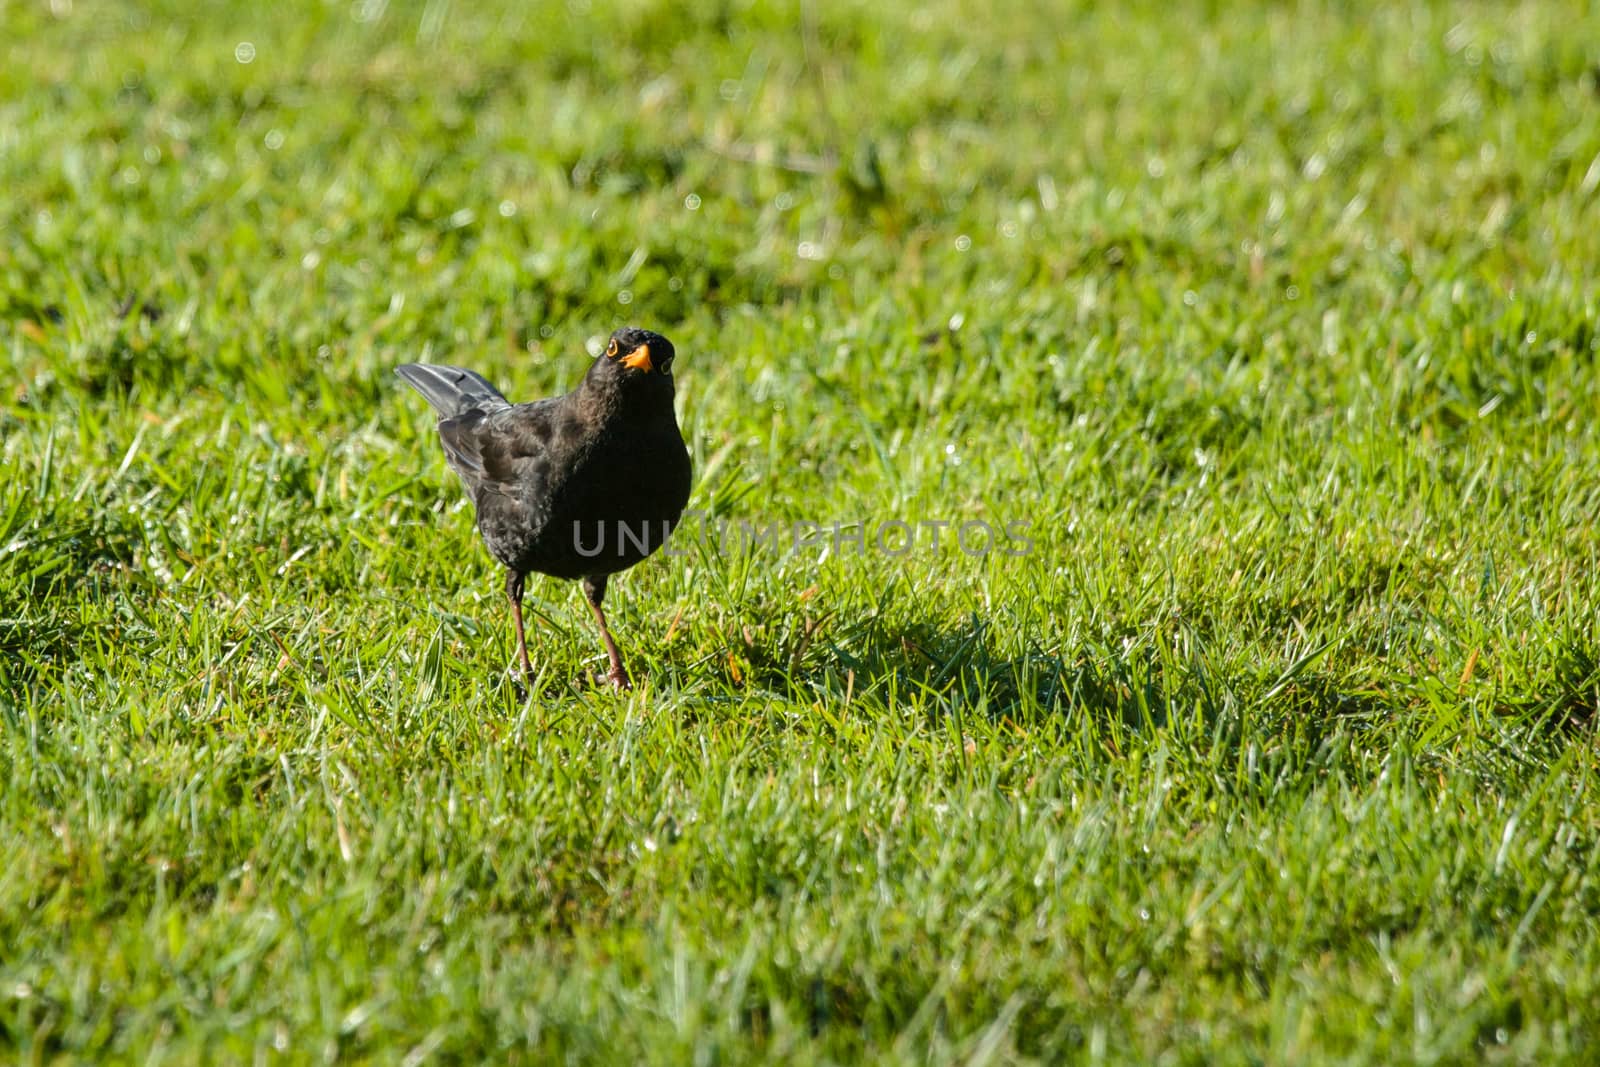 Blackbird on a lawn looking into the camera by Sportactive